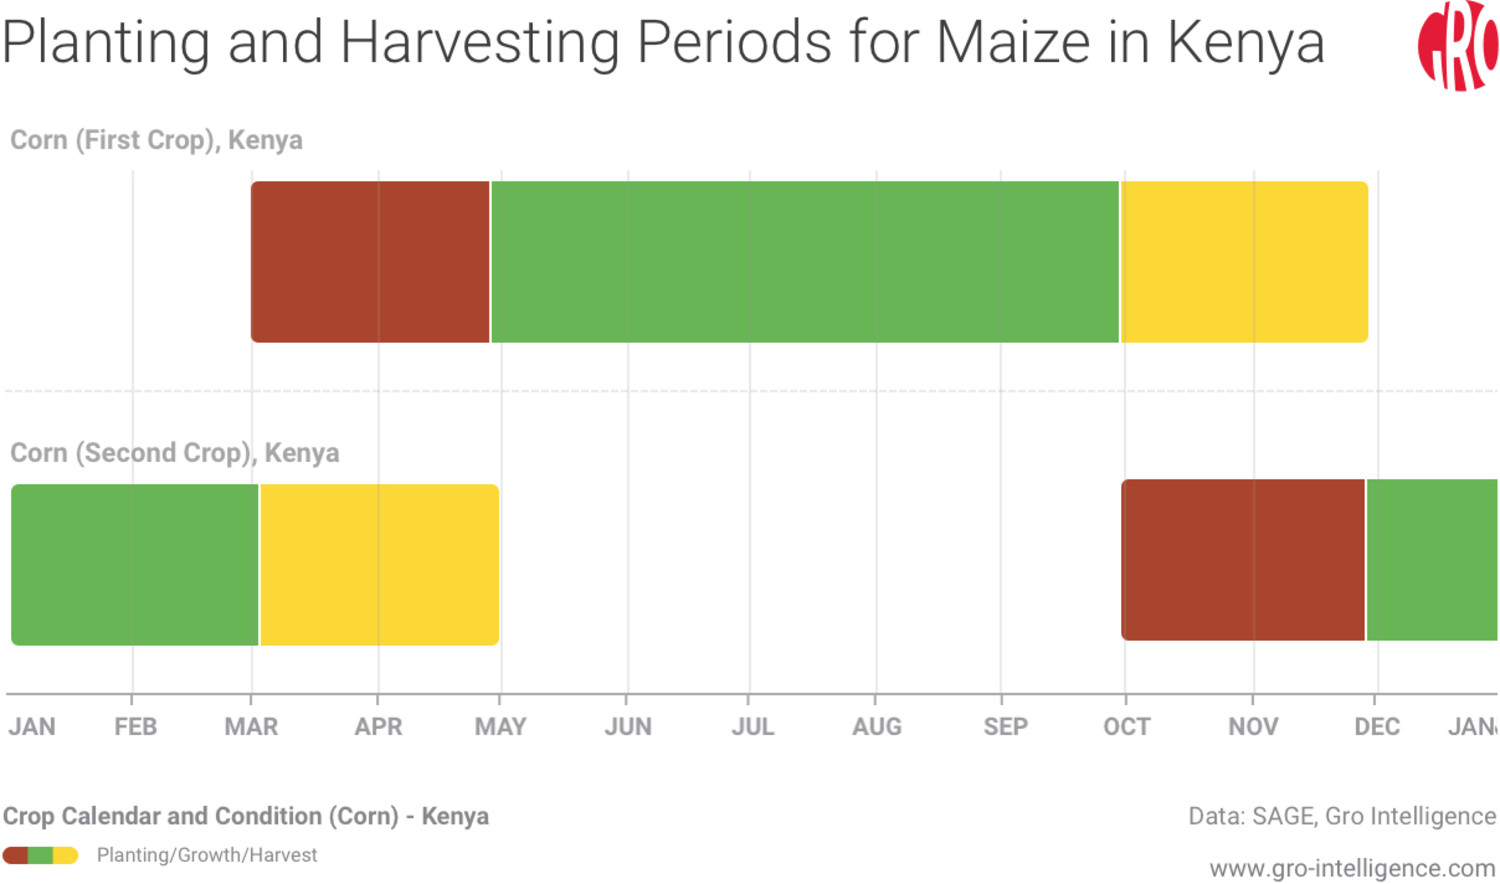 Planting and Harvesting Periods for Maize in Kenya